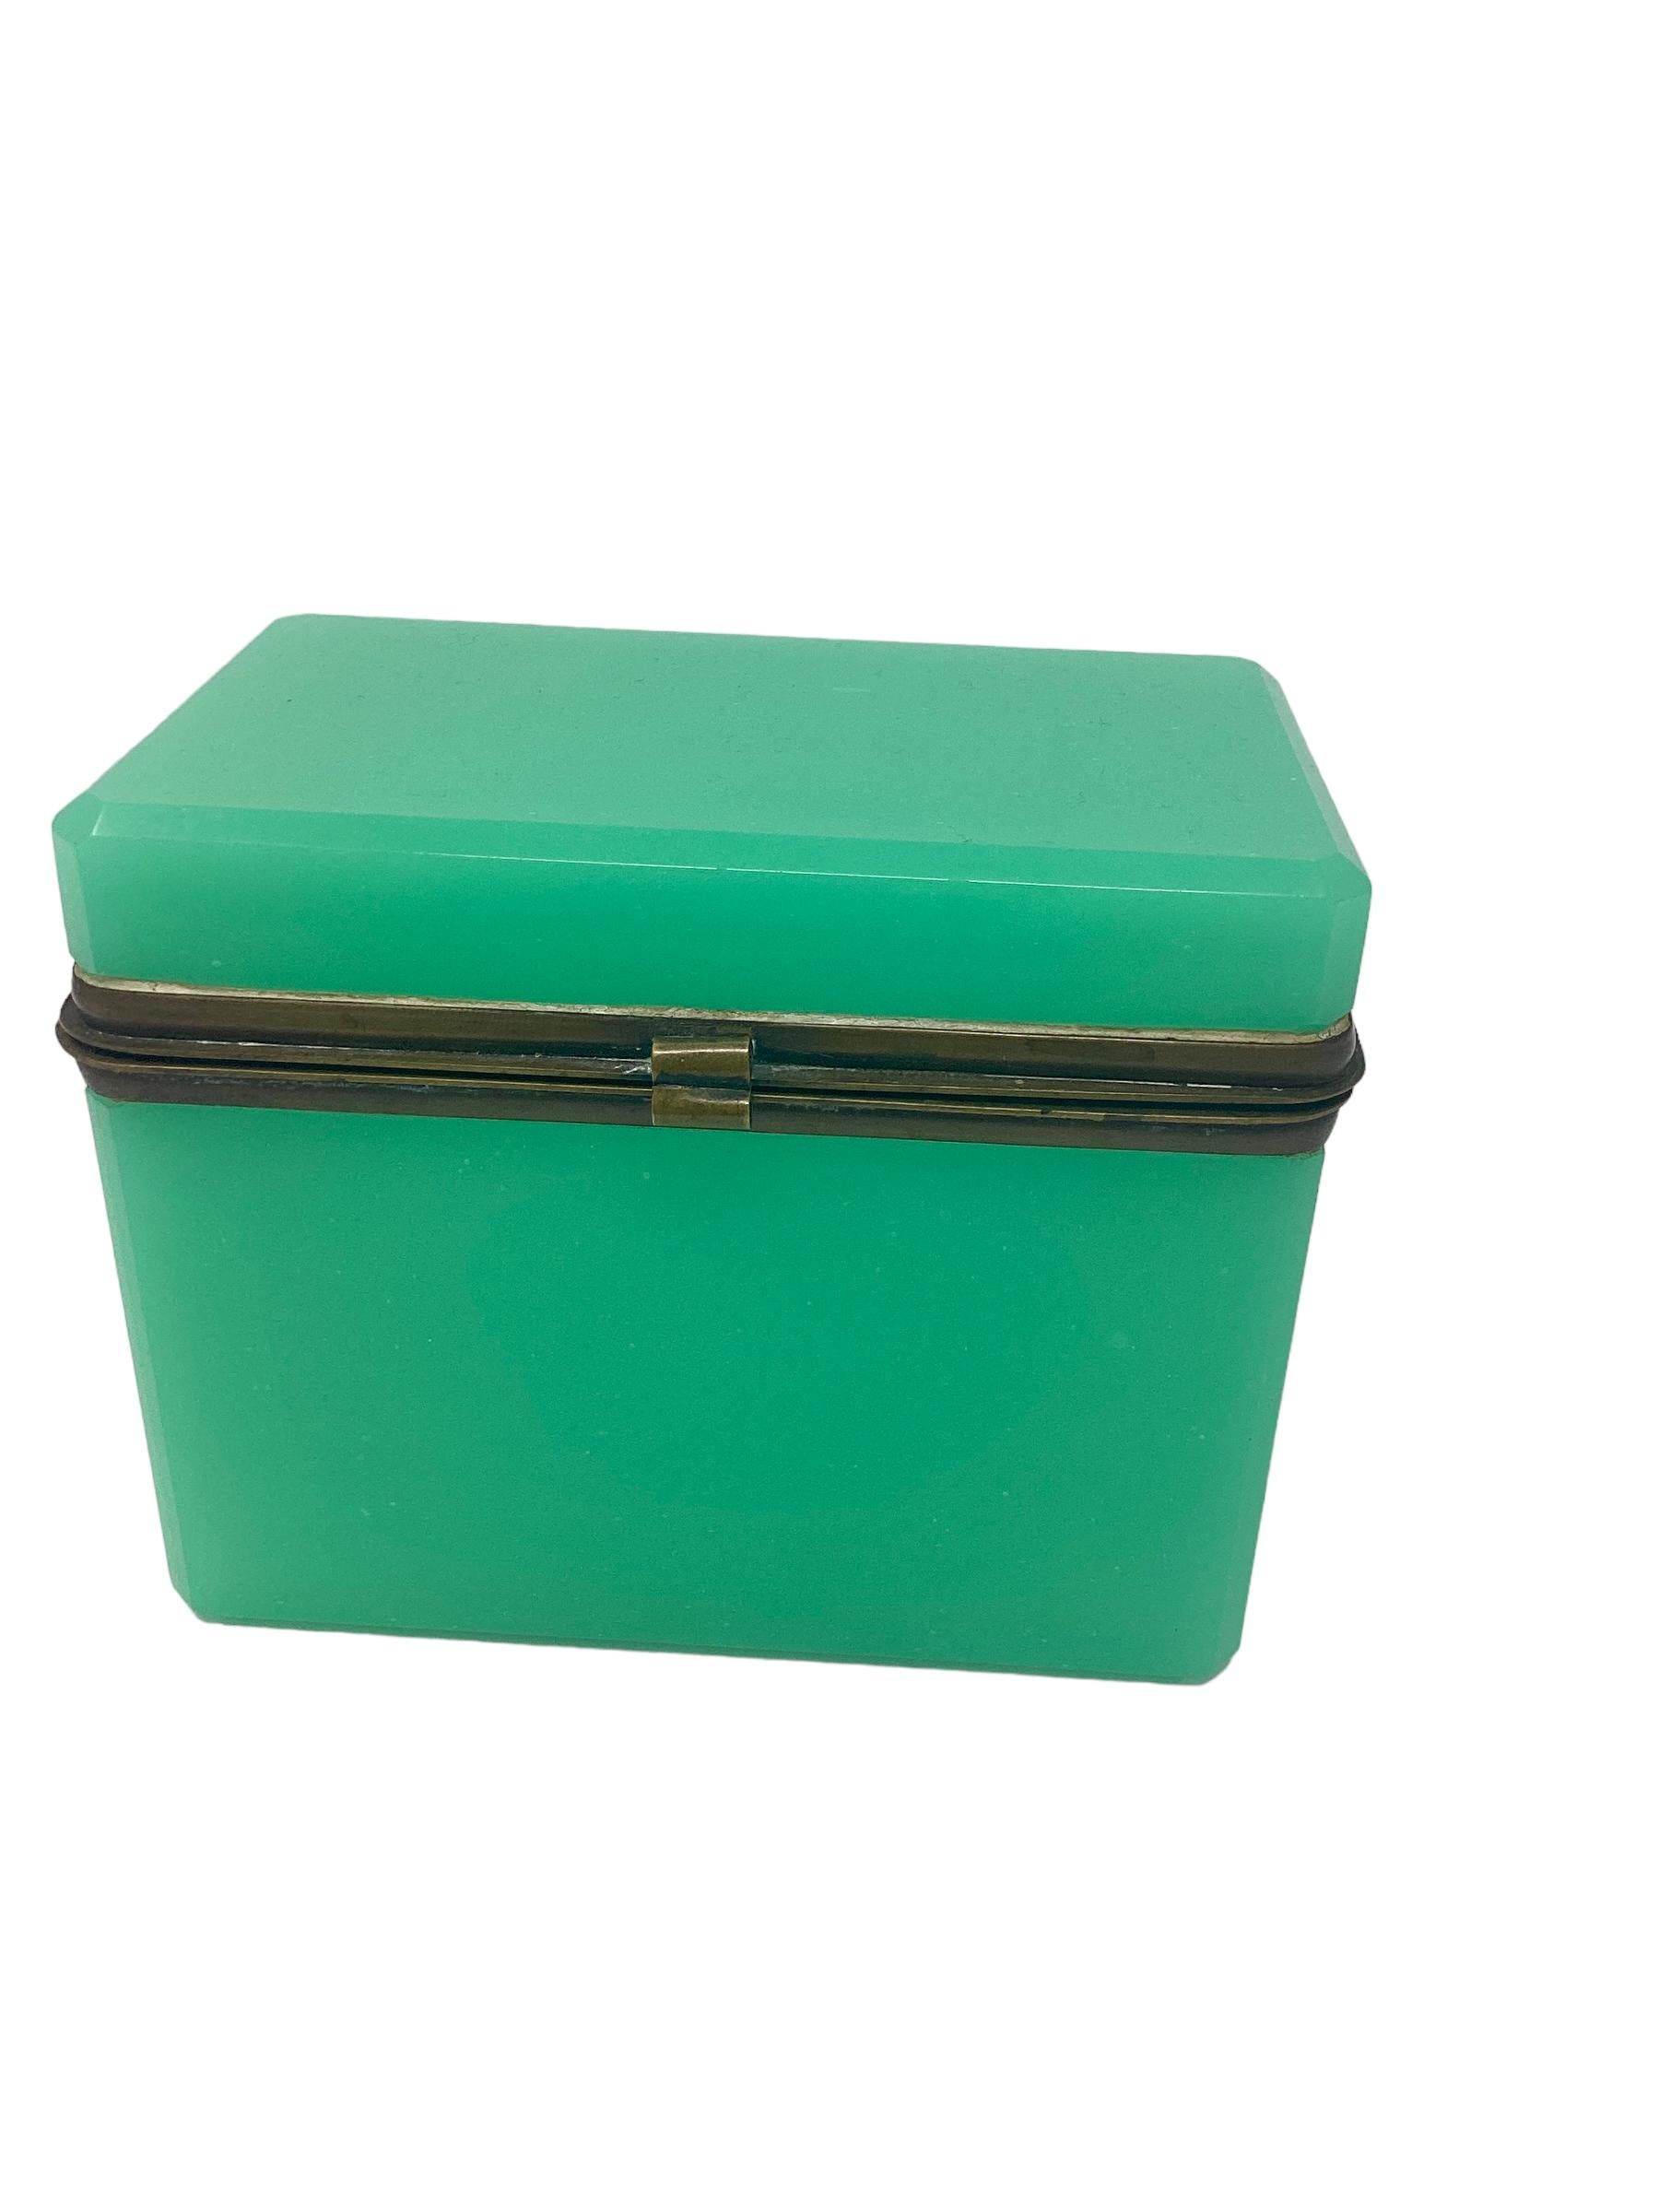 19th Century French Green Opaline Glass Box For Sale 2